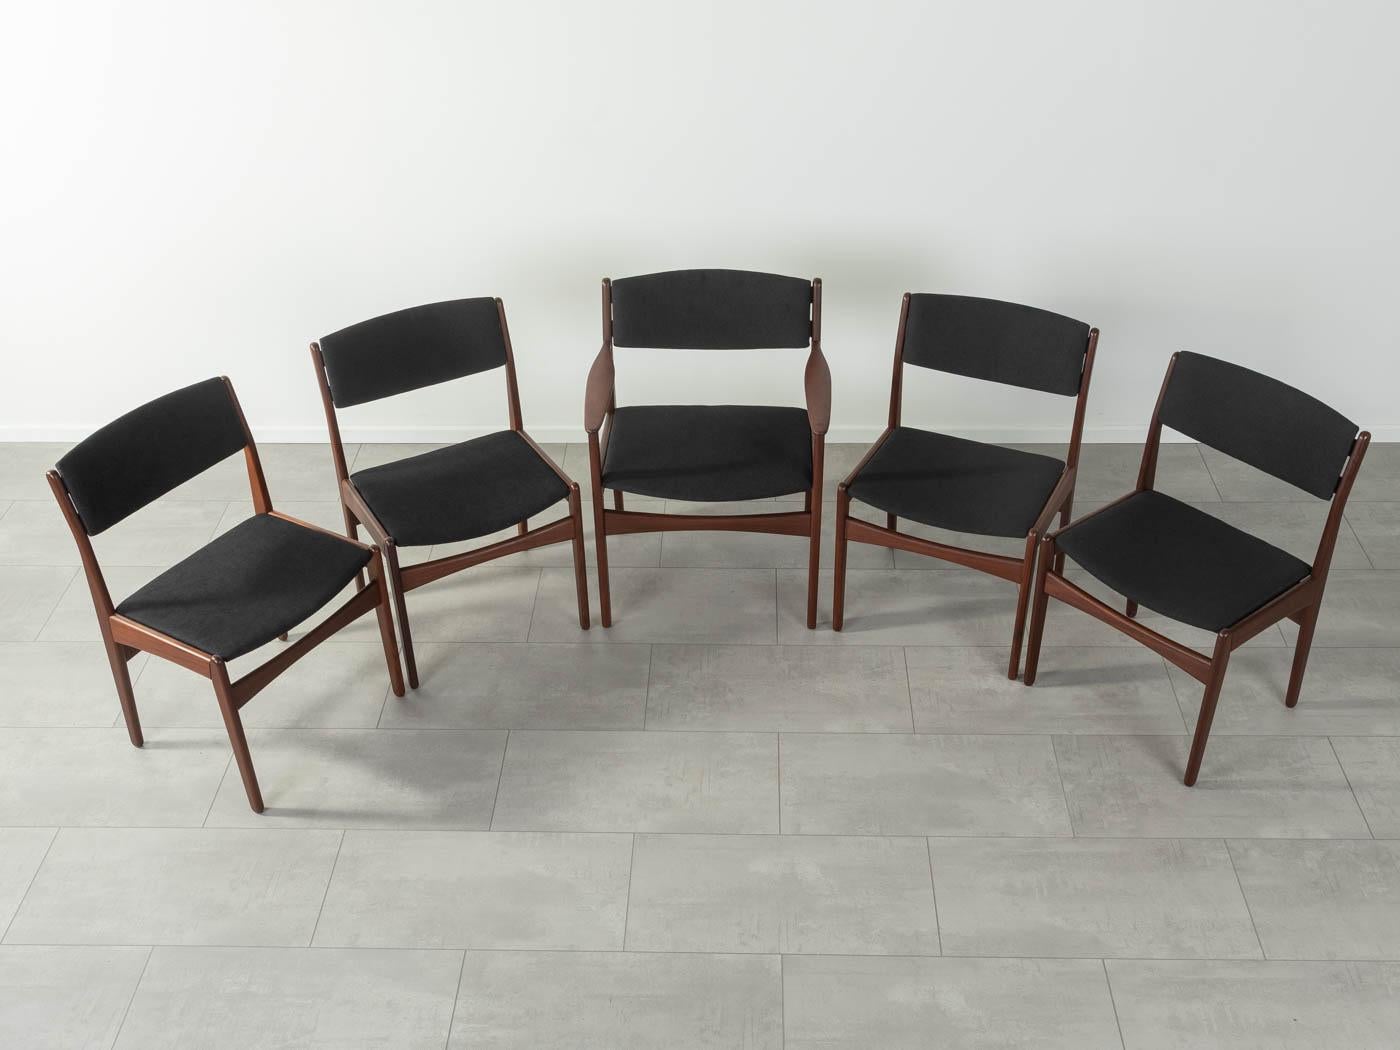 Classic dining chairs from the 1960s by Poul Volther for Frem Røjle. Solid teak frame. The chairs have been reupholstered and covered with a high-quality fabric in charcoal grey. The offer includes 5 chairs.
Quality Features:
accomplished design: